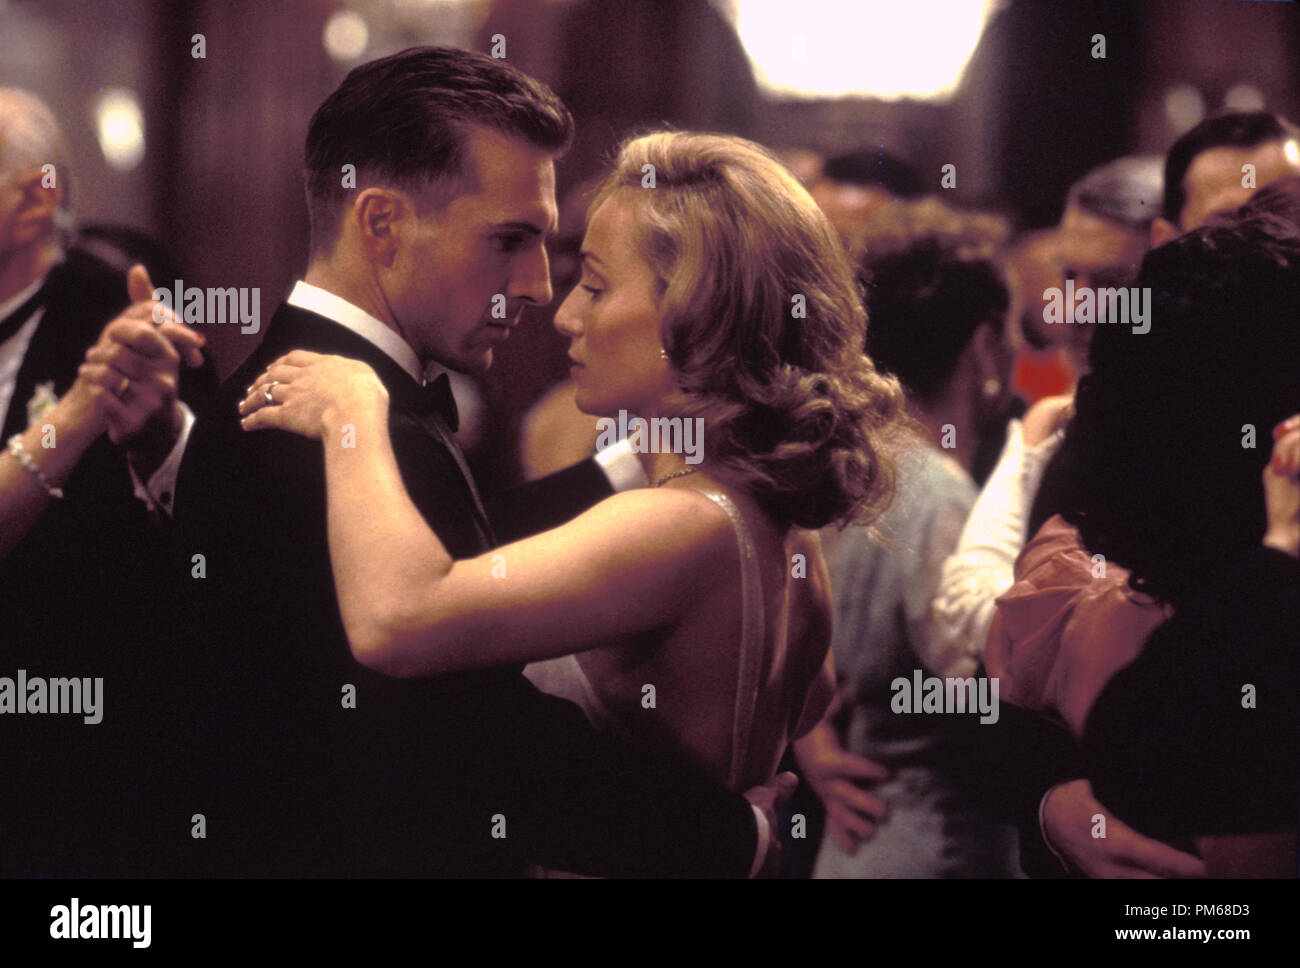 Film Still from 'The English Patient' Ralph Fiennes, Kristin Scott Thomas © 1996 Miramax Photo Credit: Phil Bray  File Reference # 31042145THA  For Editorial Use Only - All Rights Reserved Stock Photo